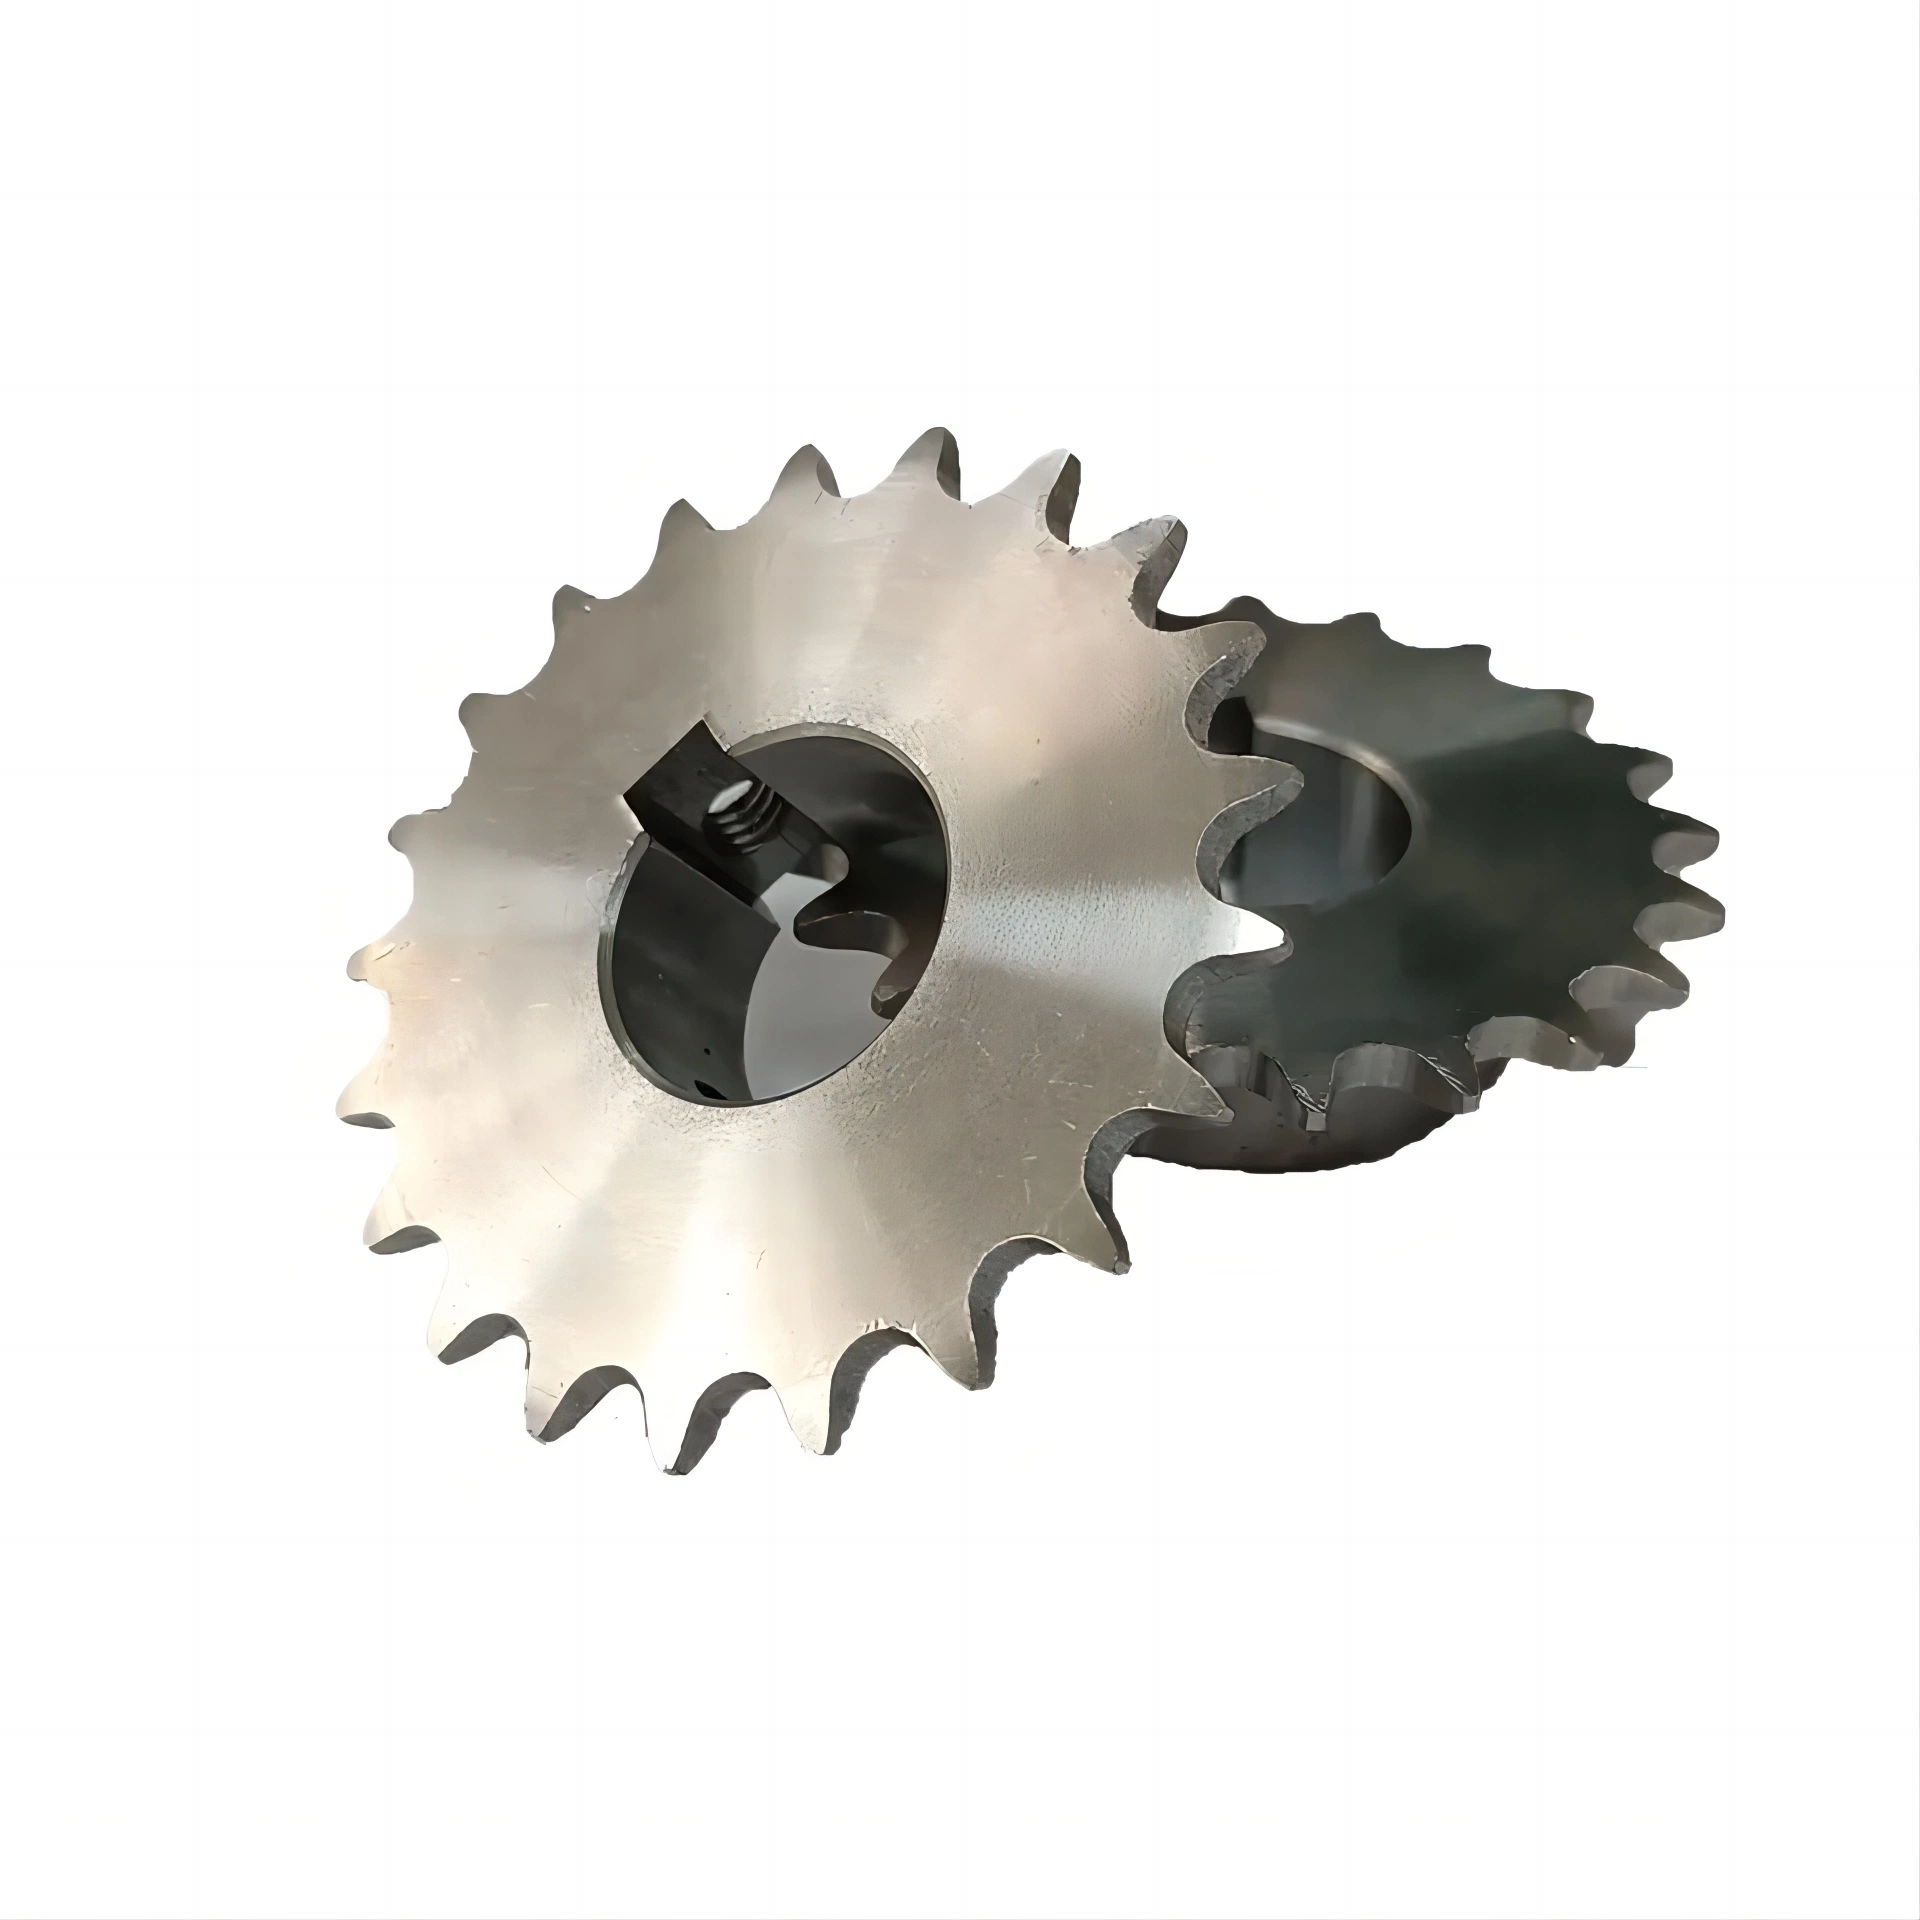 Transmission Motorcycle Parts Mining Machinery Roller Chains CNC Machine Steel Material Stock Sprocket Chain Wheel